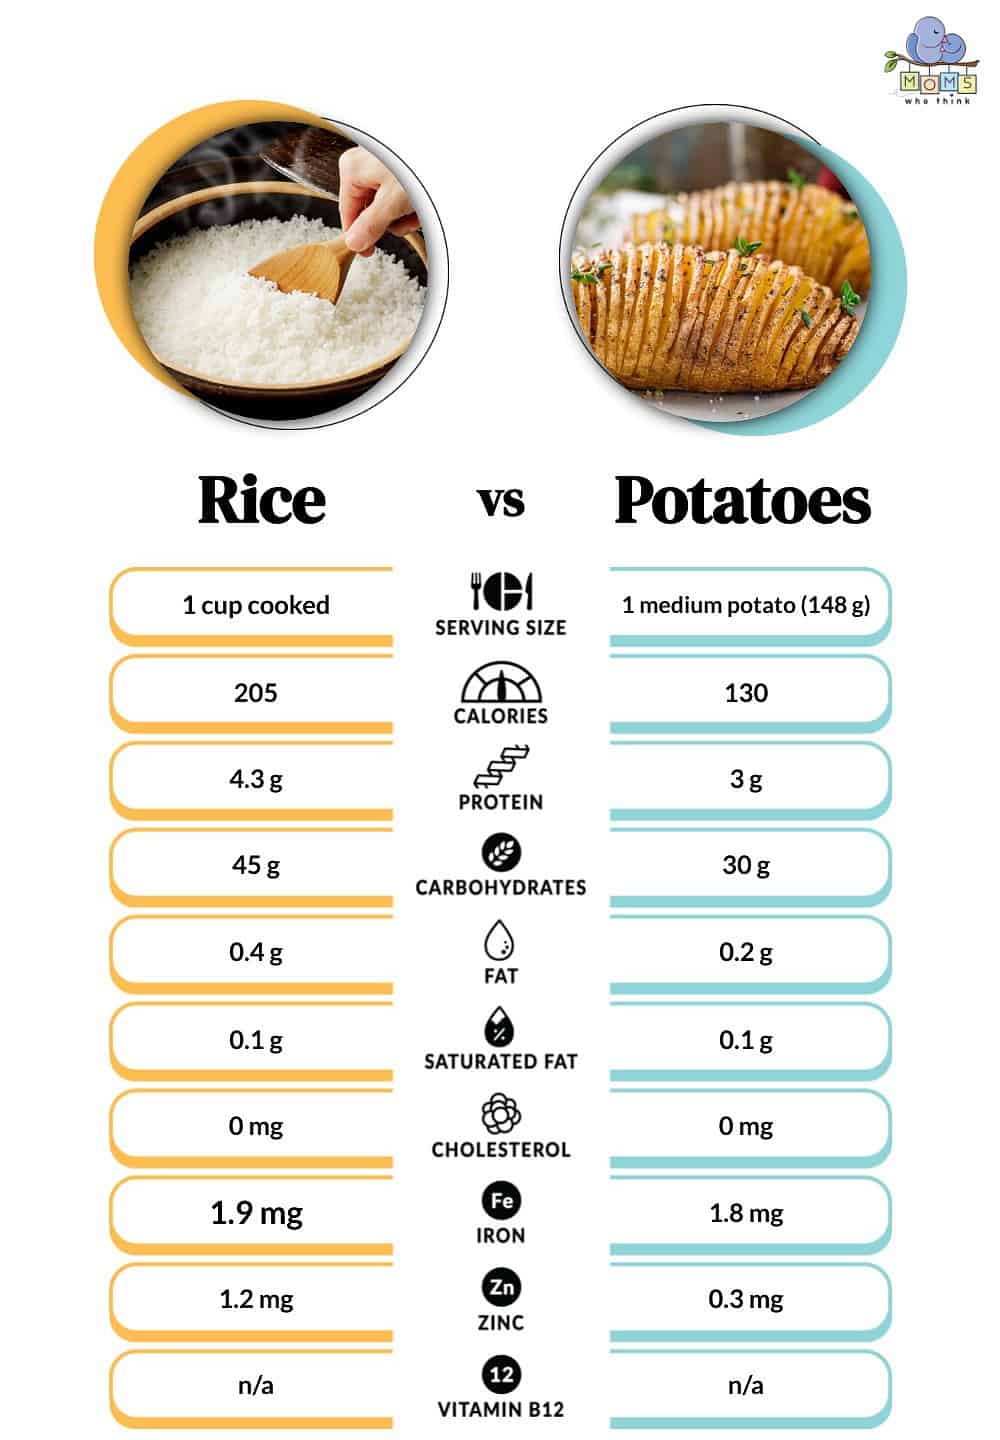 Rice vs Potatoes Nutritional Facts